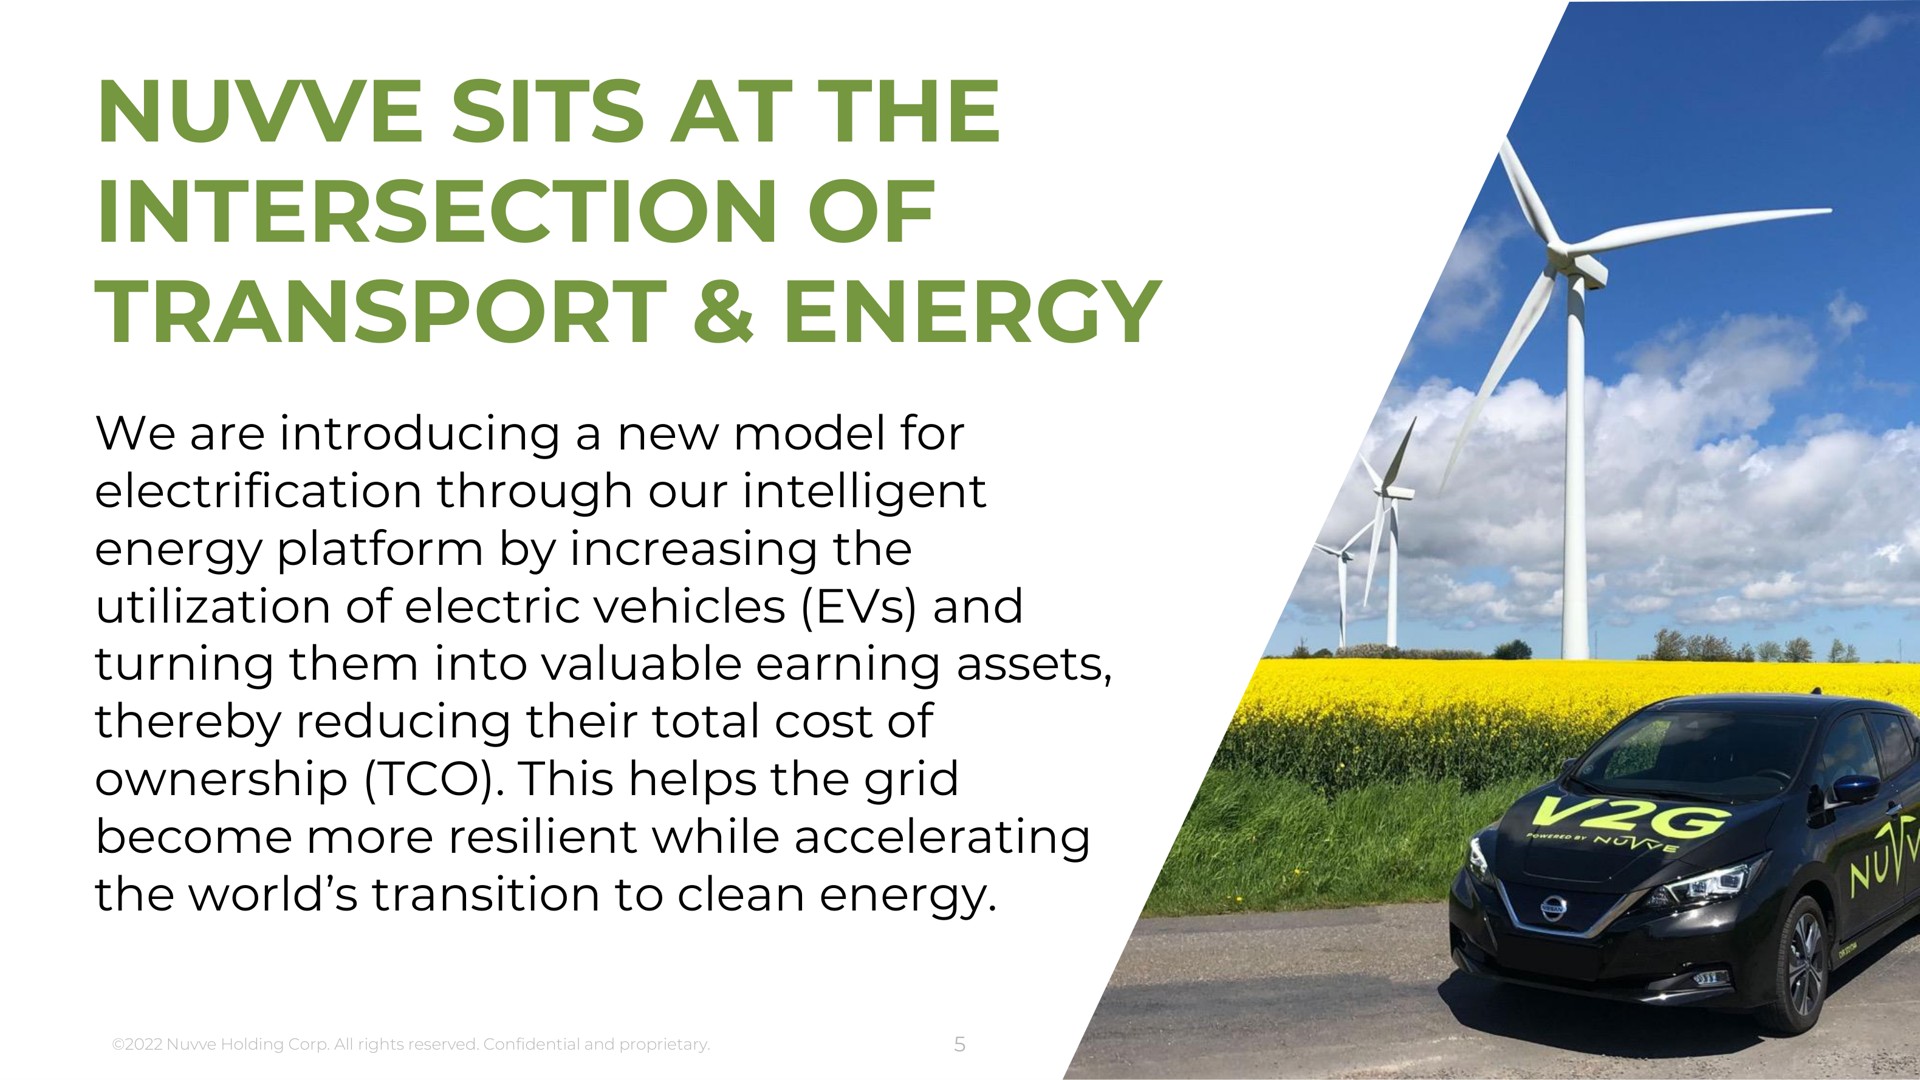 sits at the intersection of transport energy we are introducing a new model for electrification through our intelligent platform by increasing utilization electric vehicles and turning them into valuable earning assets thereby reducing their total cost ownership this helps grid become more resilient while accelerating world transition to clean | Nuvve